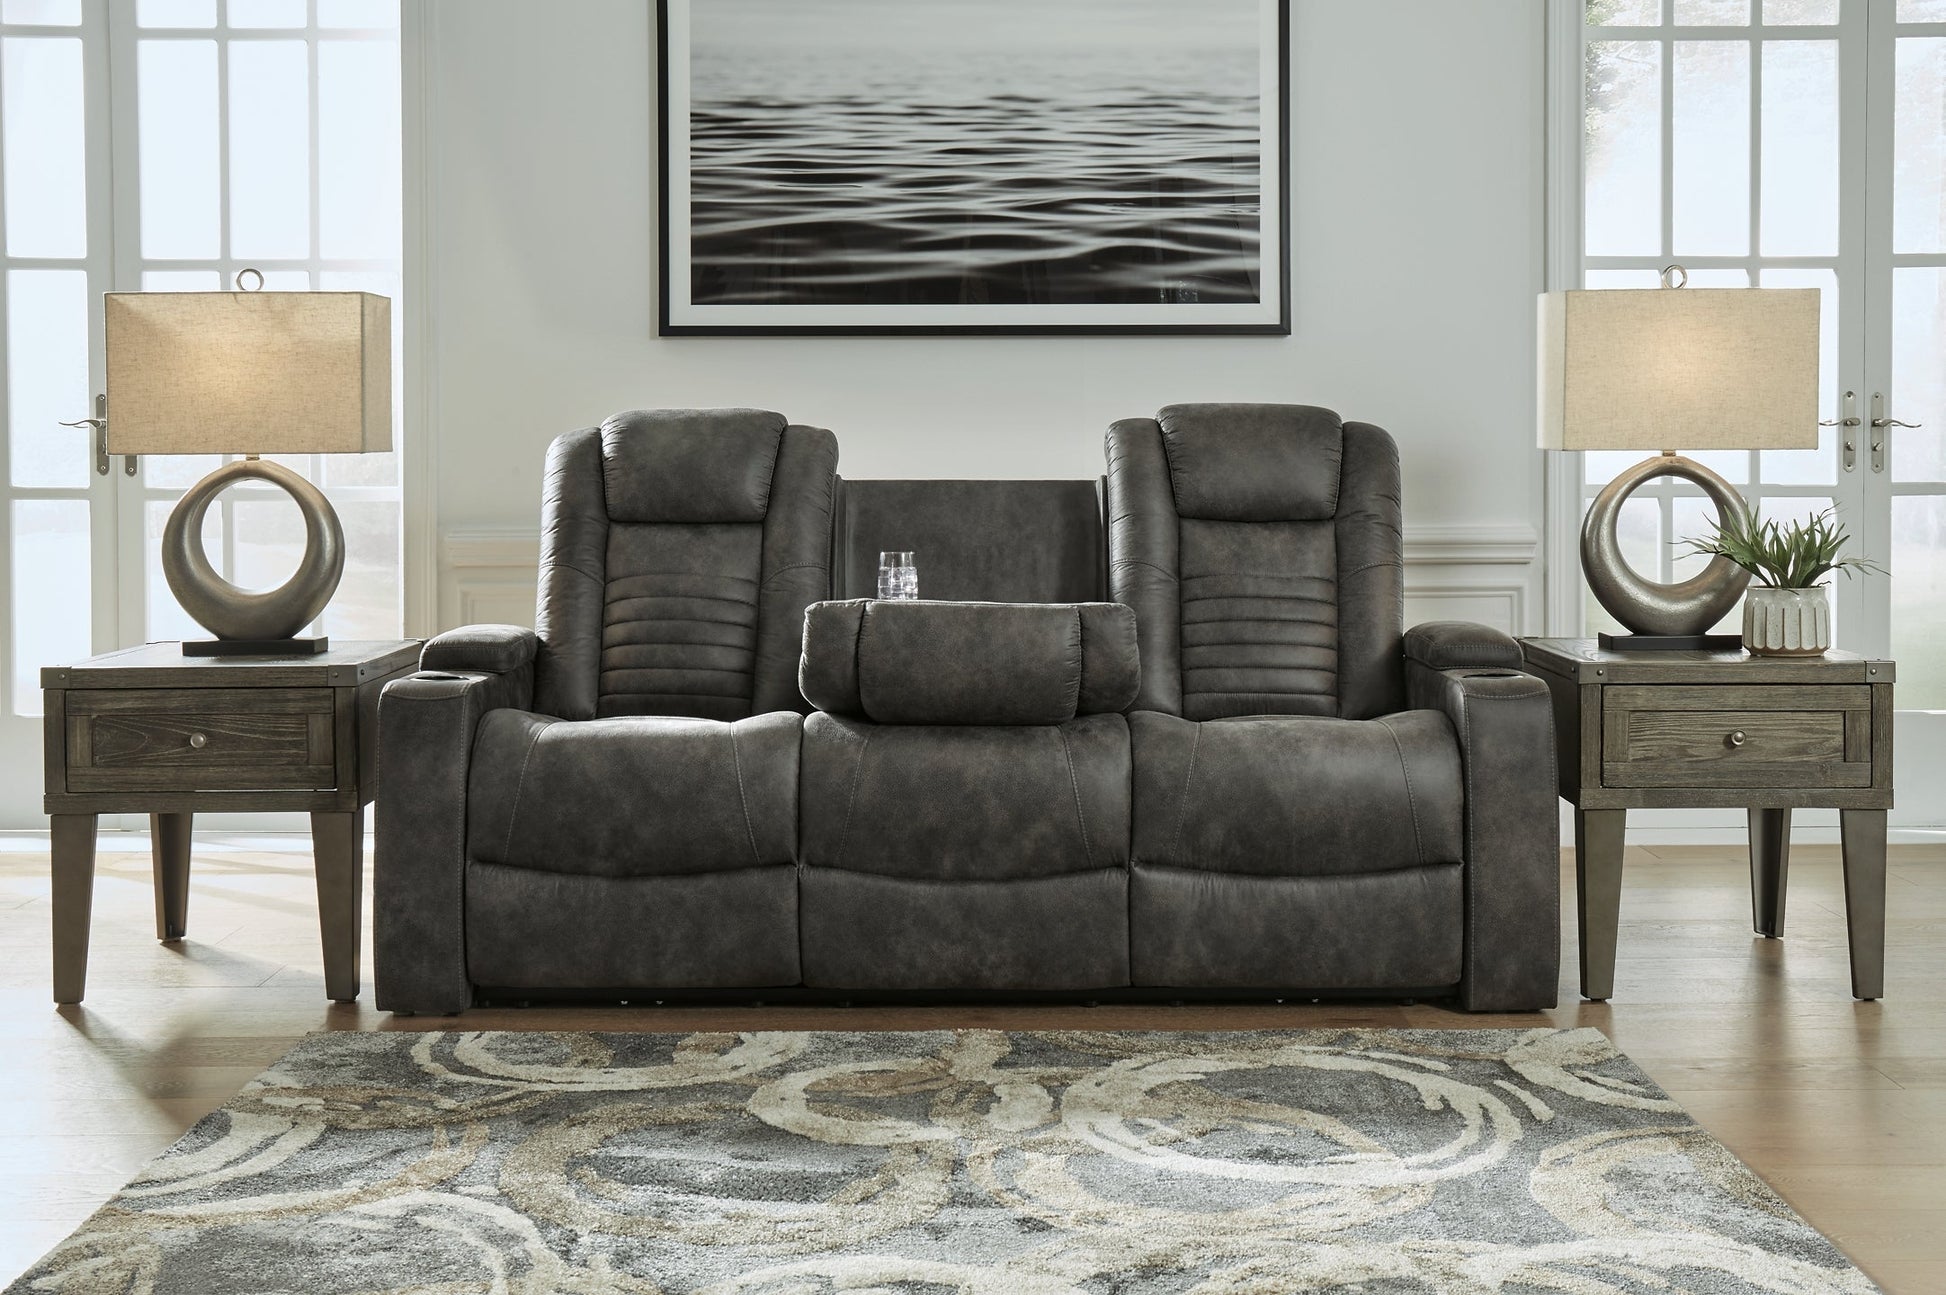 Soundcheck PWR REC Sofa with ADJ Headrest at Towne & Country Furniture (AL) furniture, home furniture, home decor, sofa, bedding